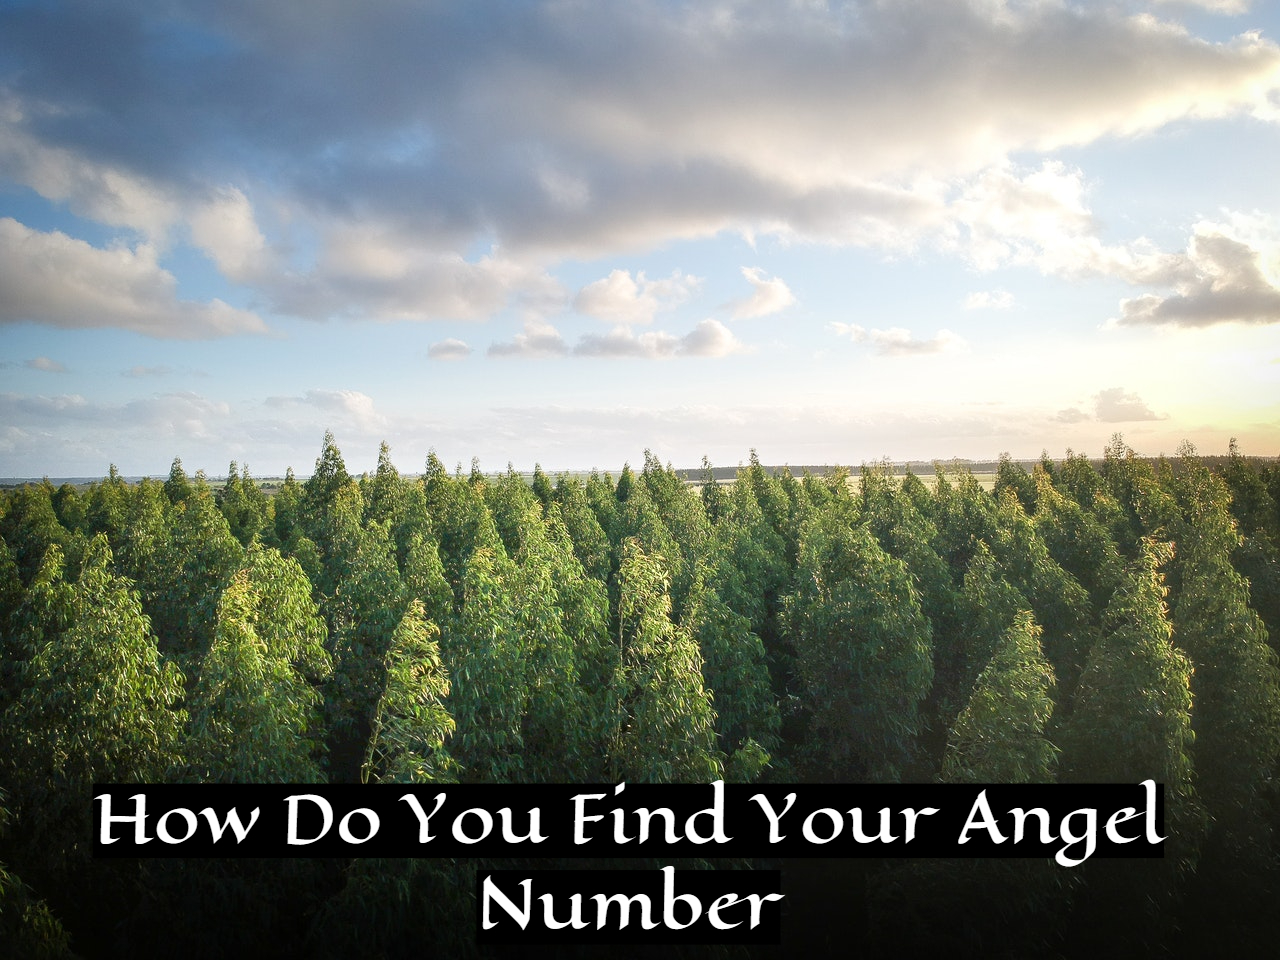 How Do You Find Your Angel Number?